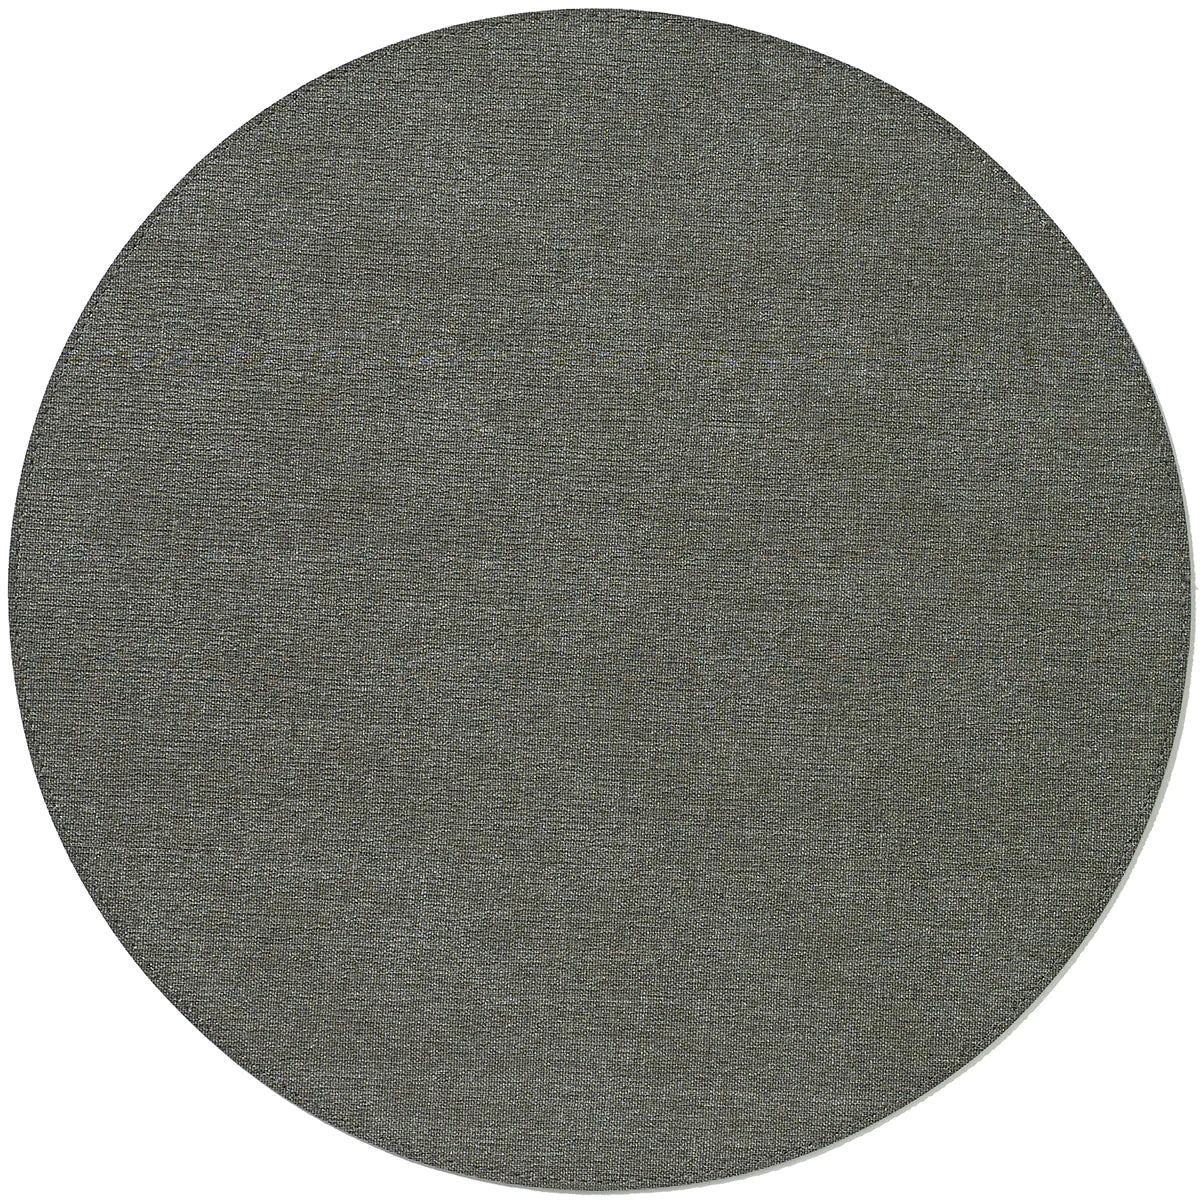 Presto Placemat Charcoal Round Set of 4